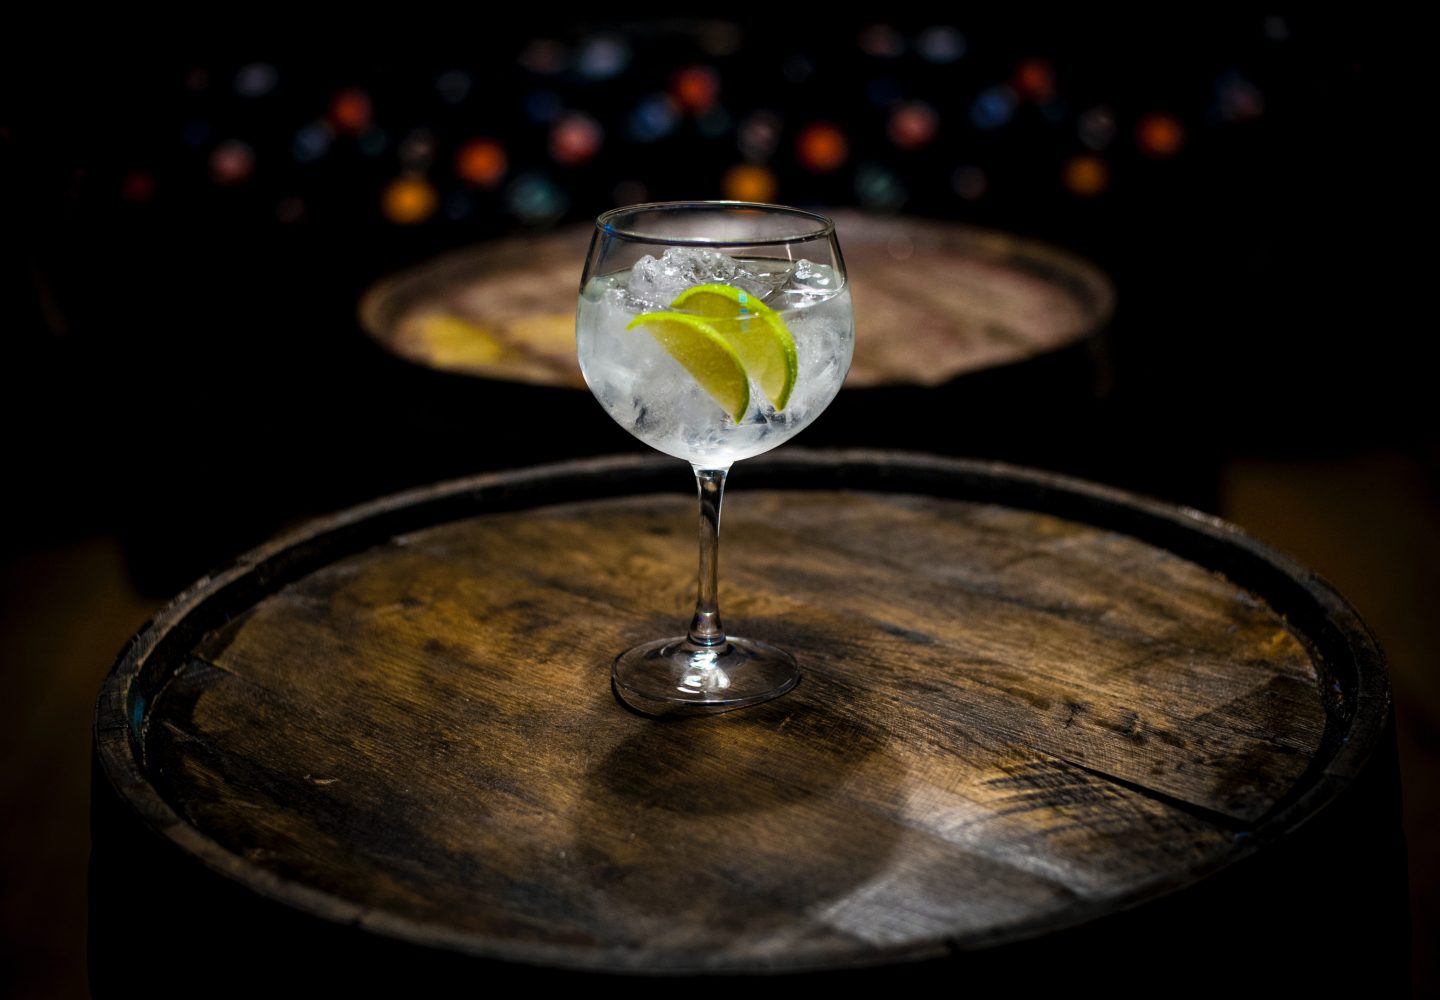 Where does gin come from?